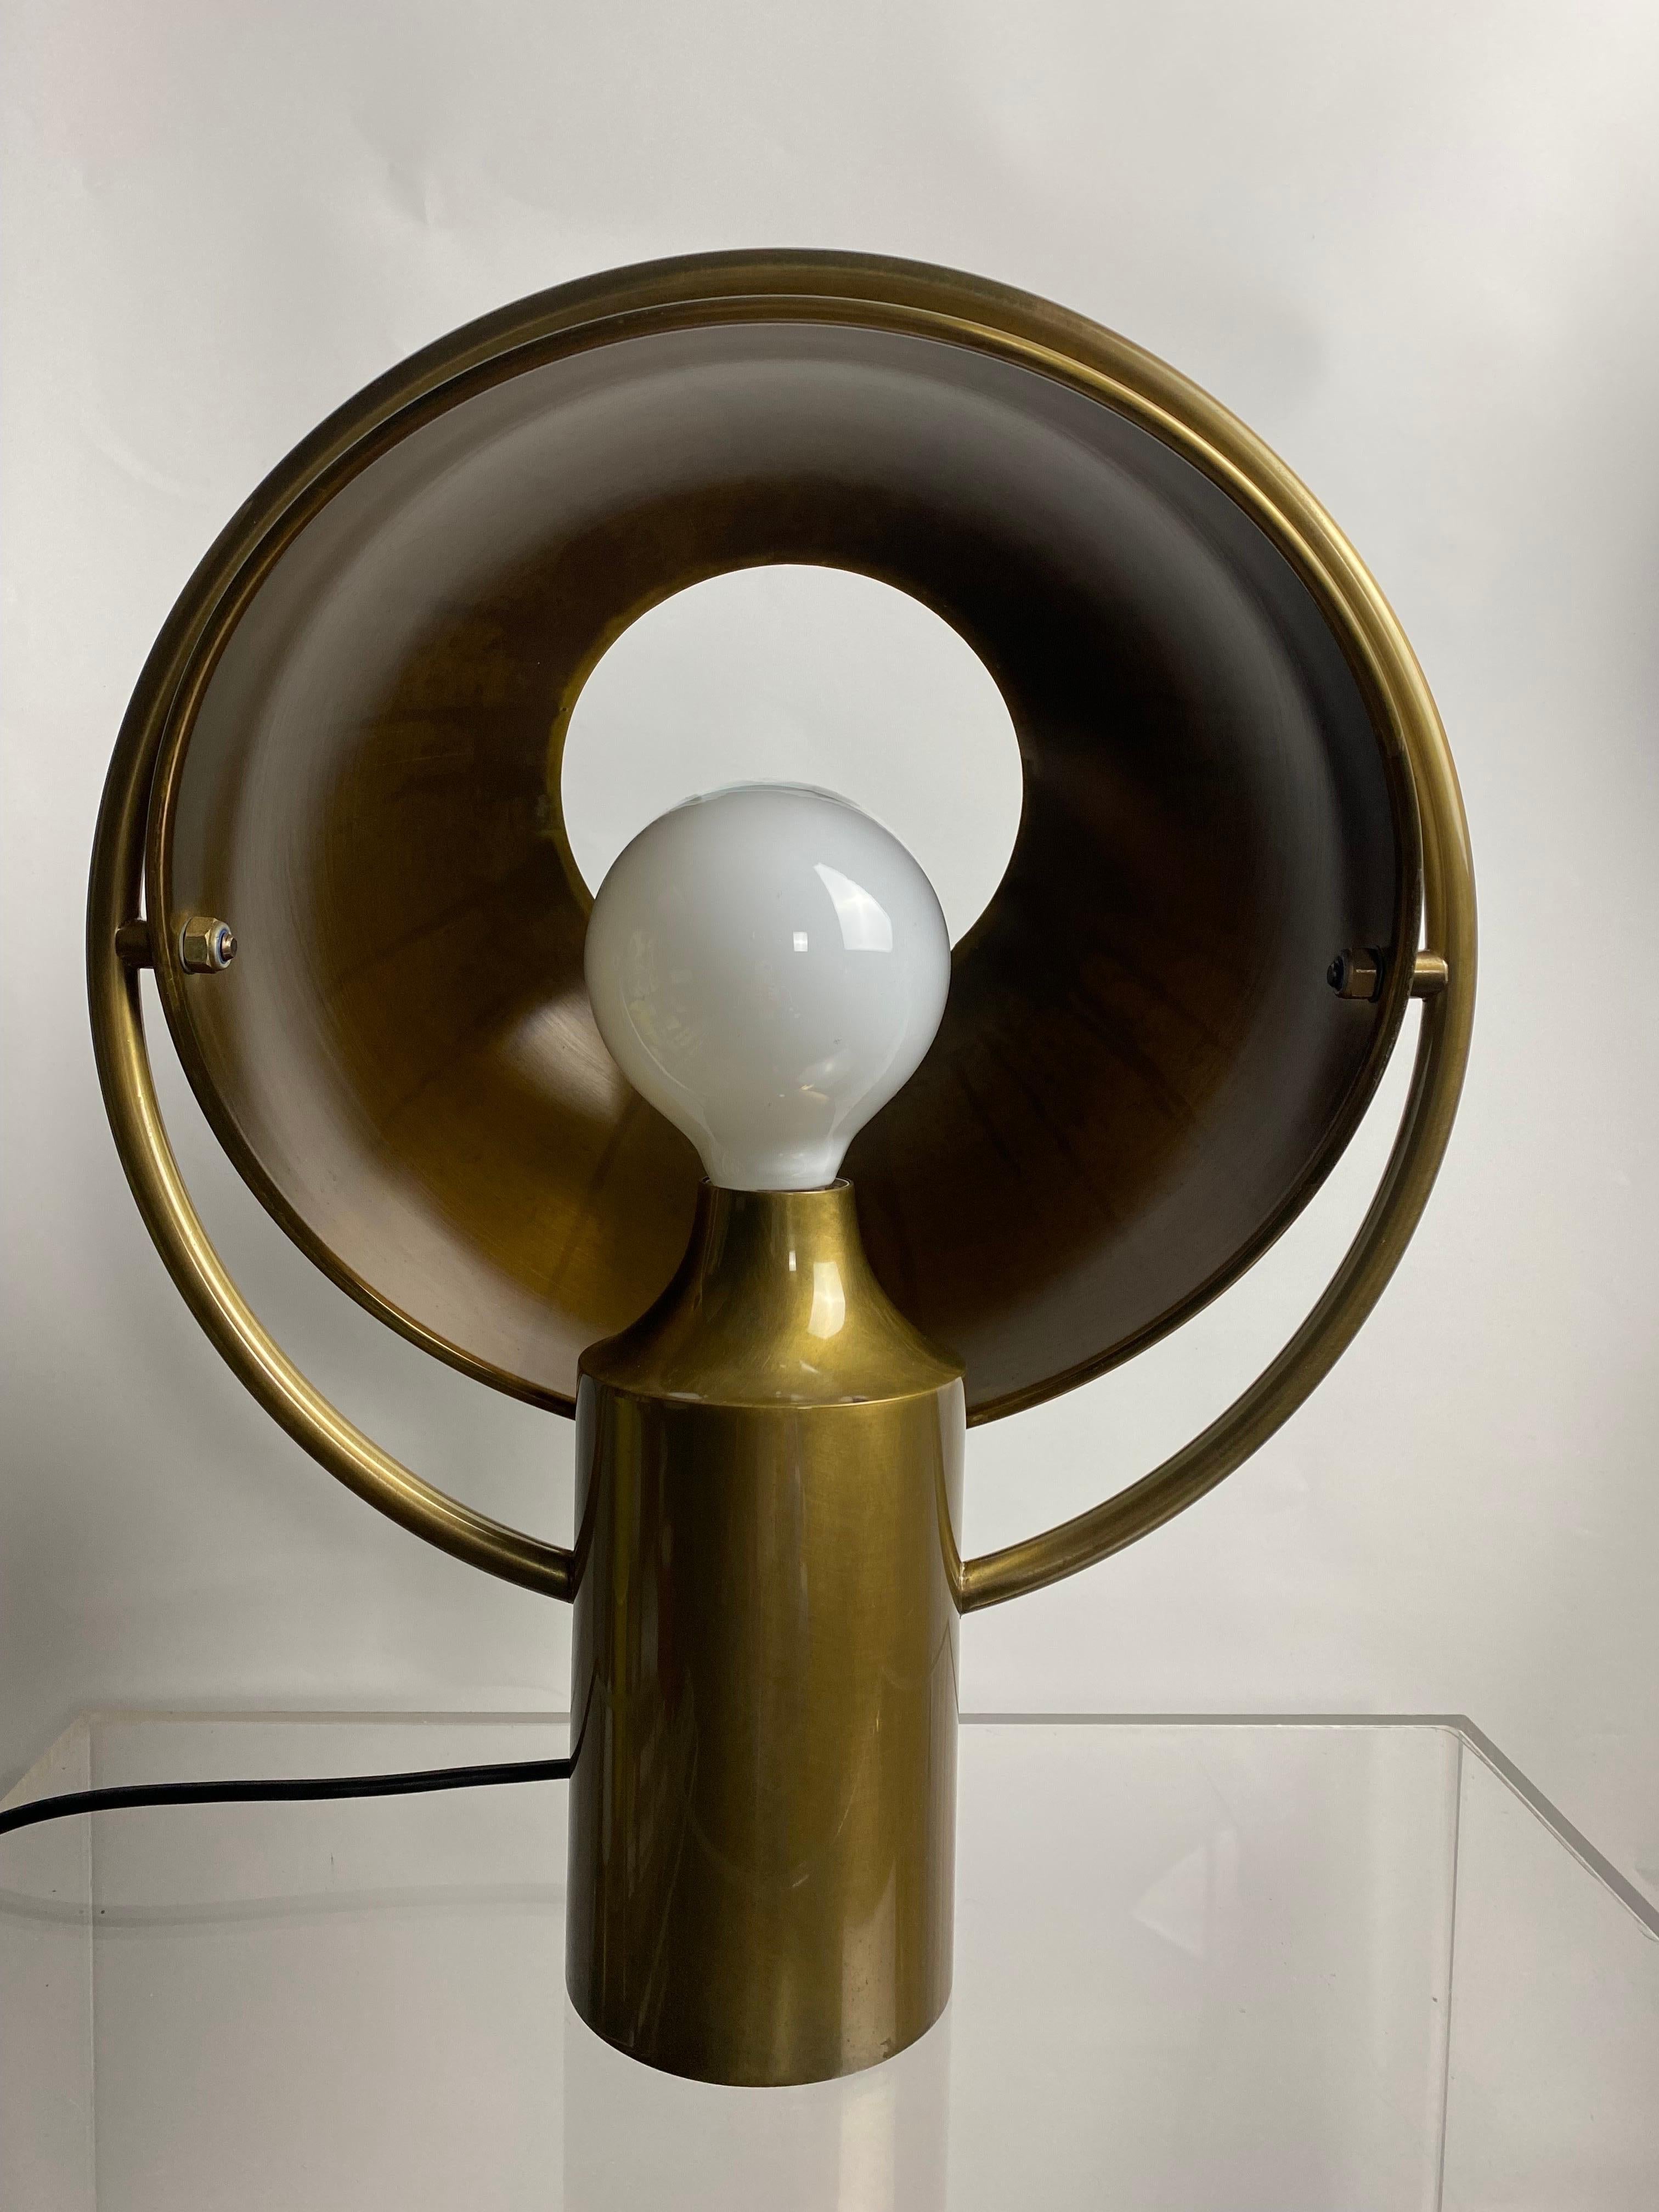 Rare German Midcentury Table Lamp in Solid Brass by Günter&Florian Schulz 1970s For Sale 13